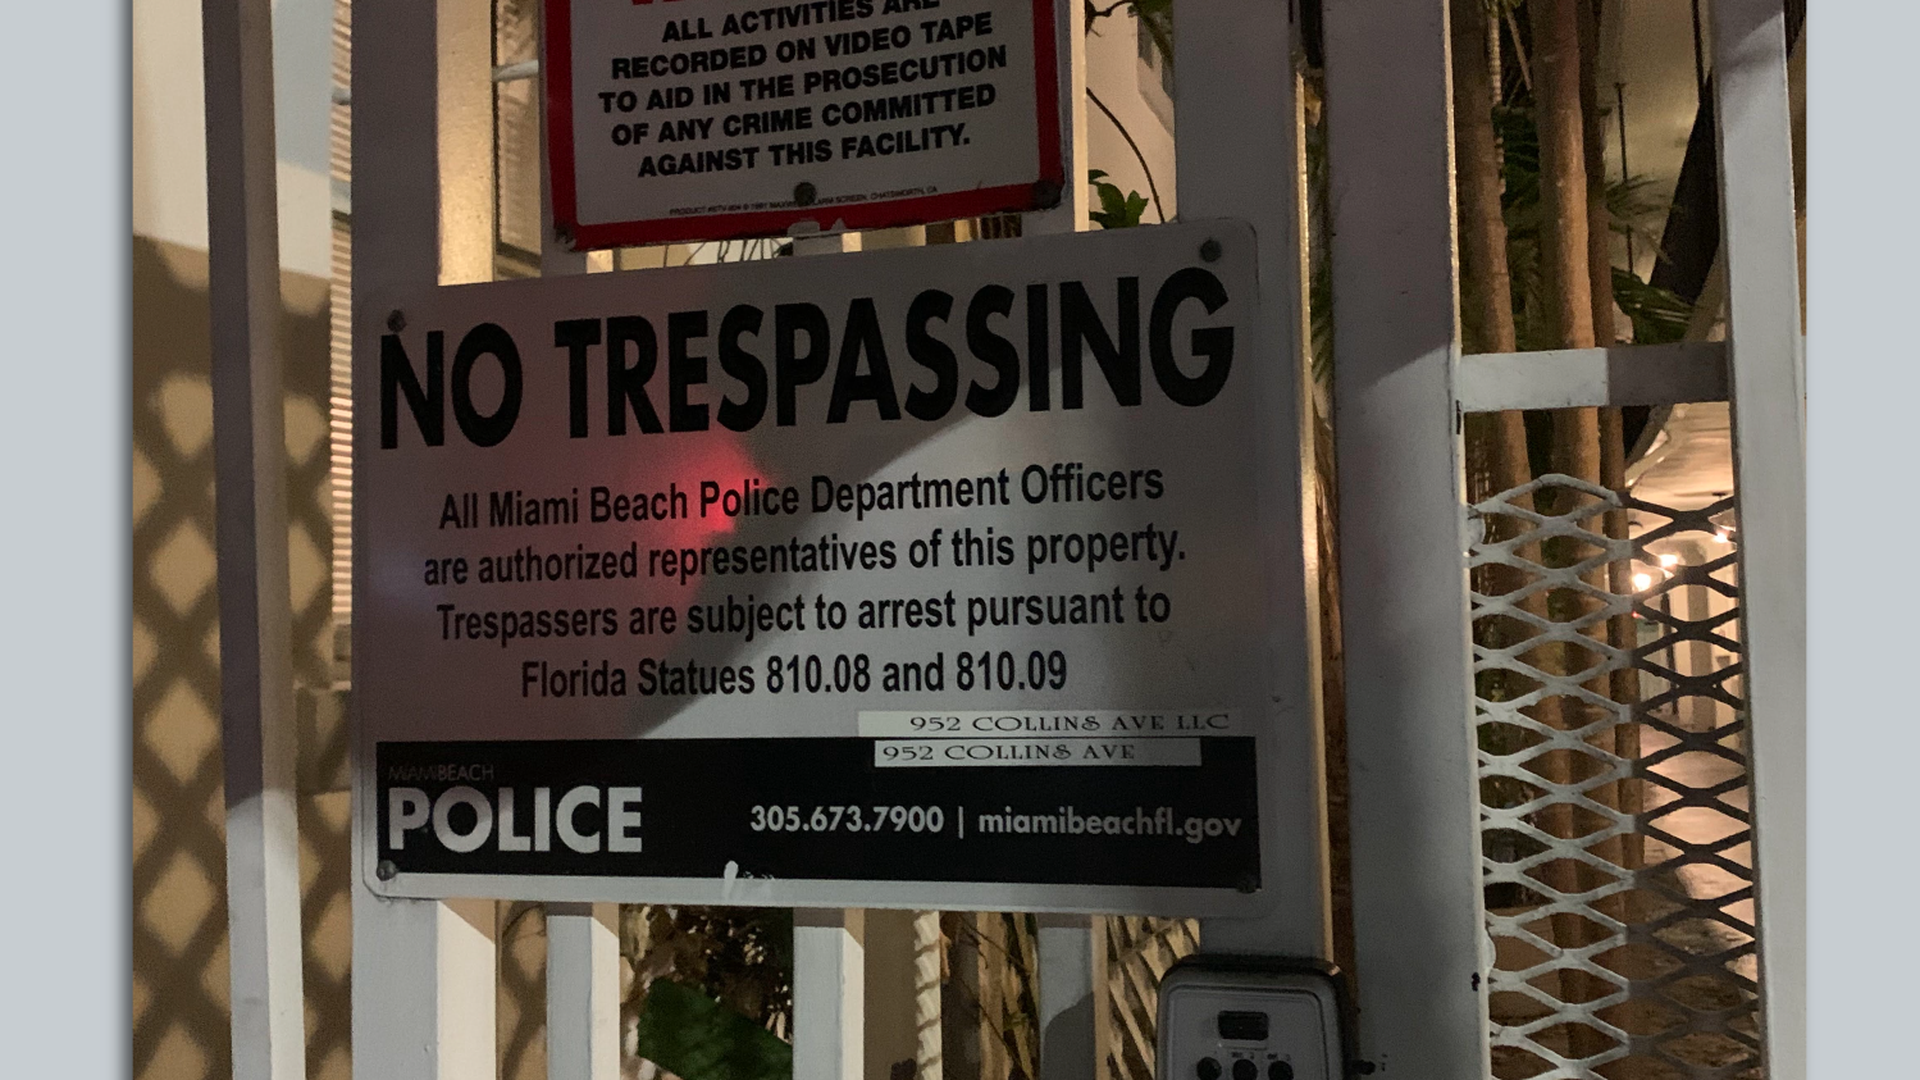 A "No Trespassing" sign with a minor typo reading "Florida Statues" instead of "Statutes" is pictured in Miami Beach.